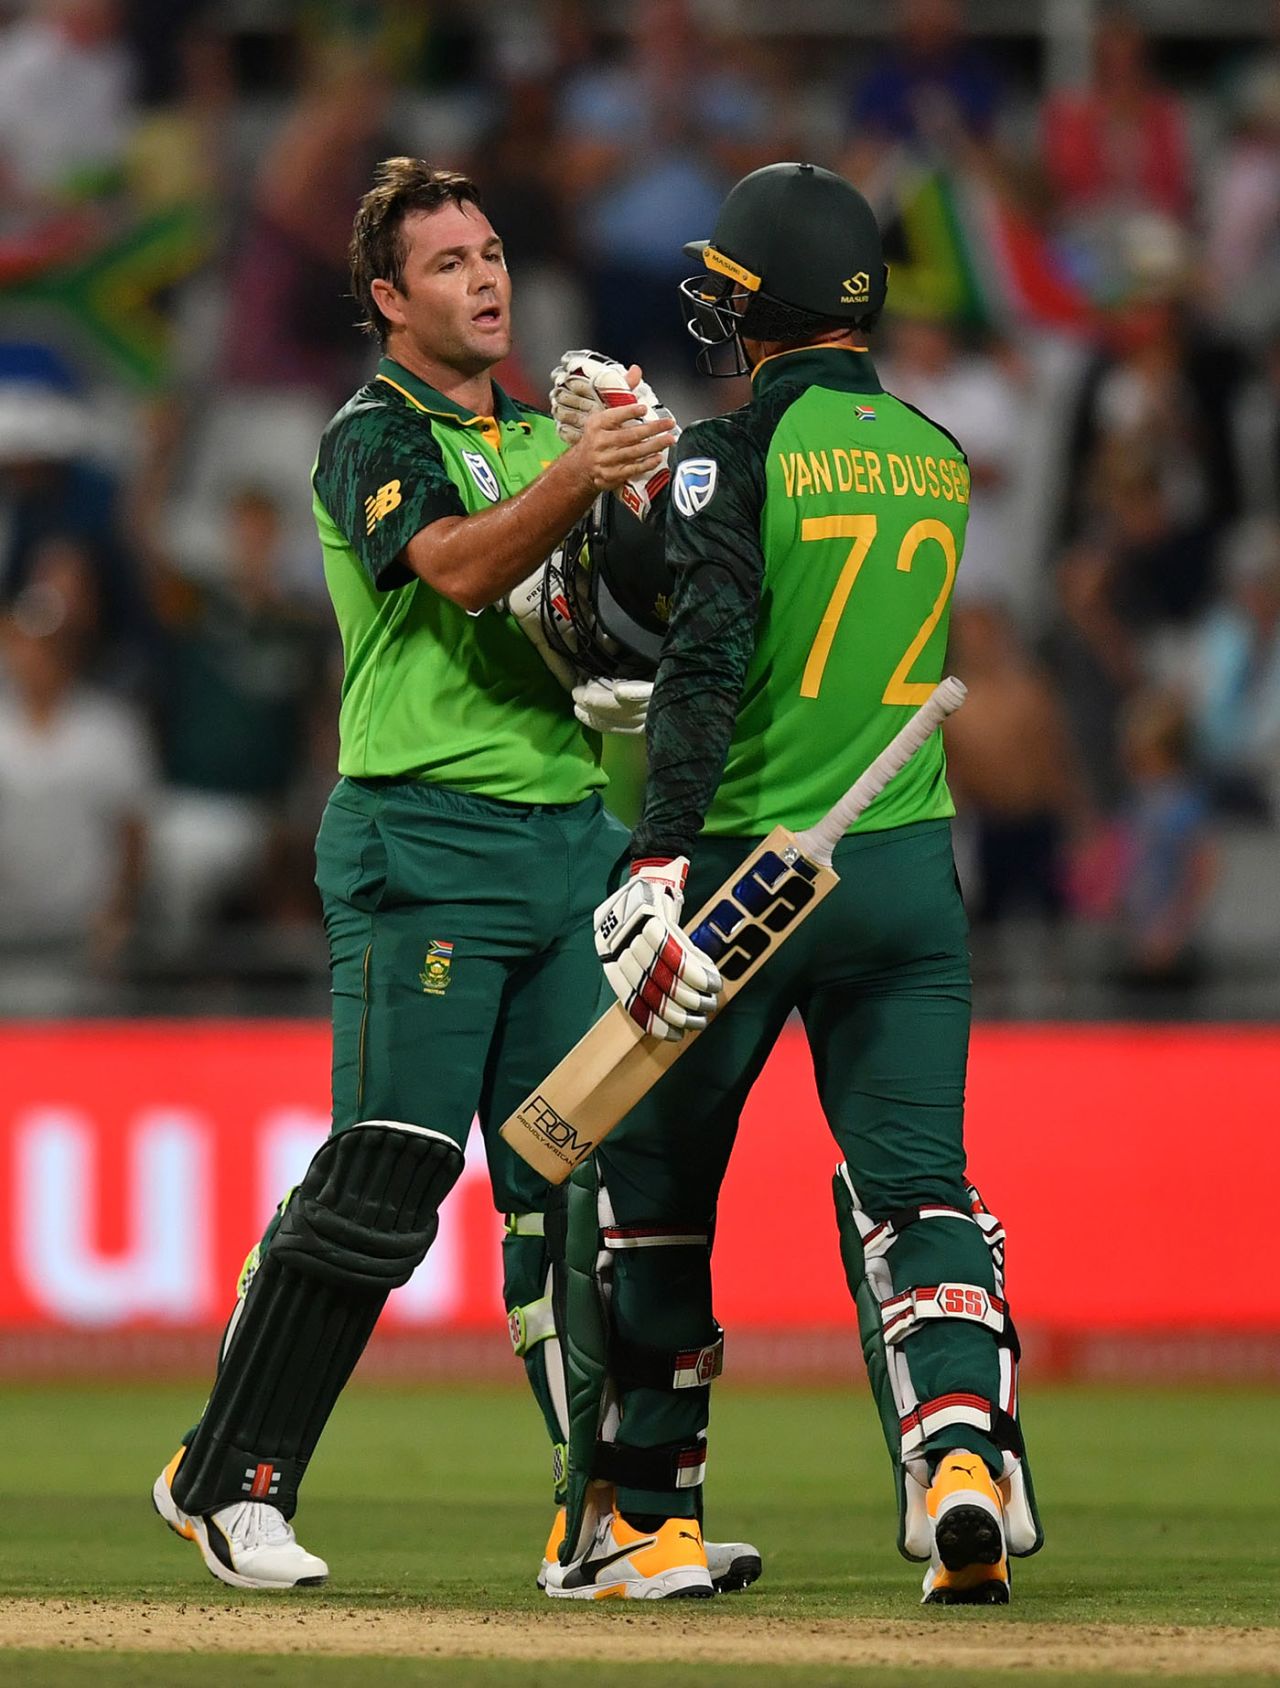 Jon-Jon Smuts and Rassie van der Dussen saw South Africa home, South Africa v England, 1st ODI, Cape Town, February 4, 2020